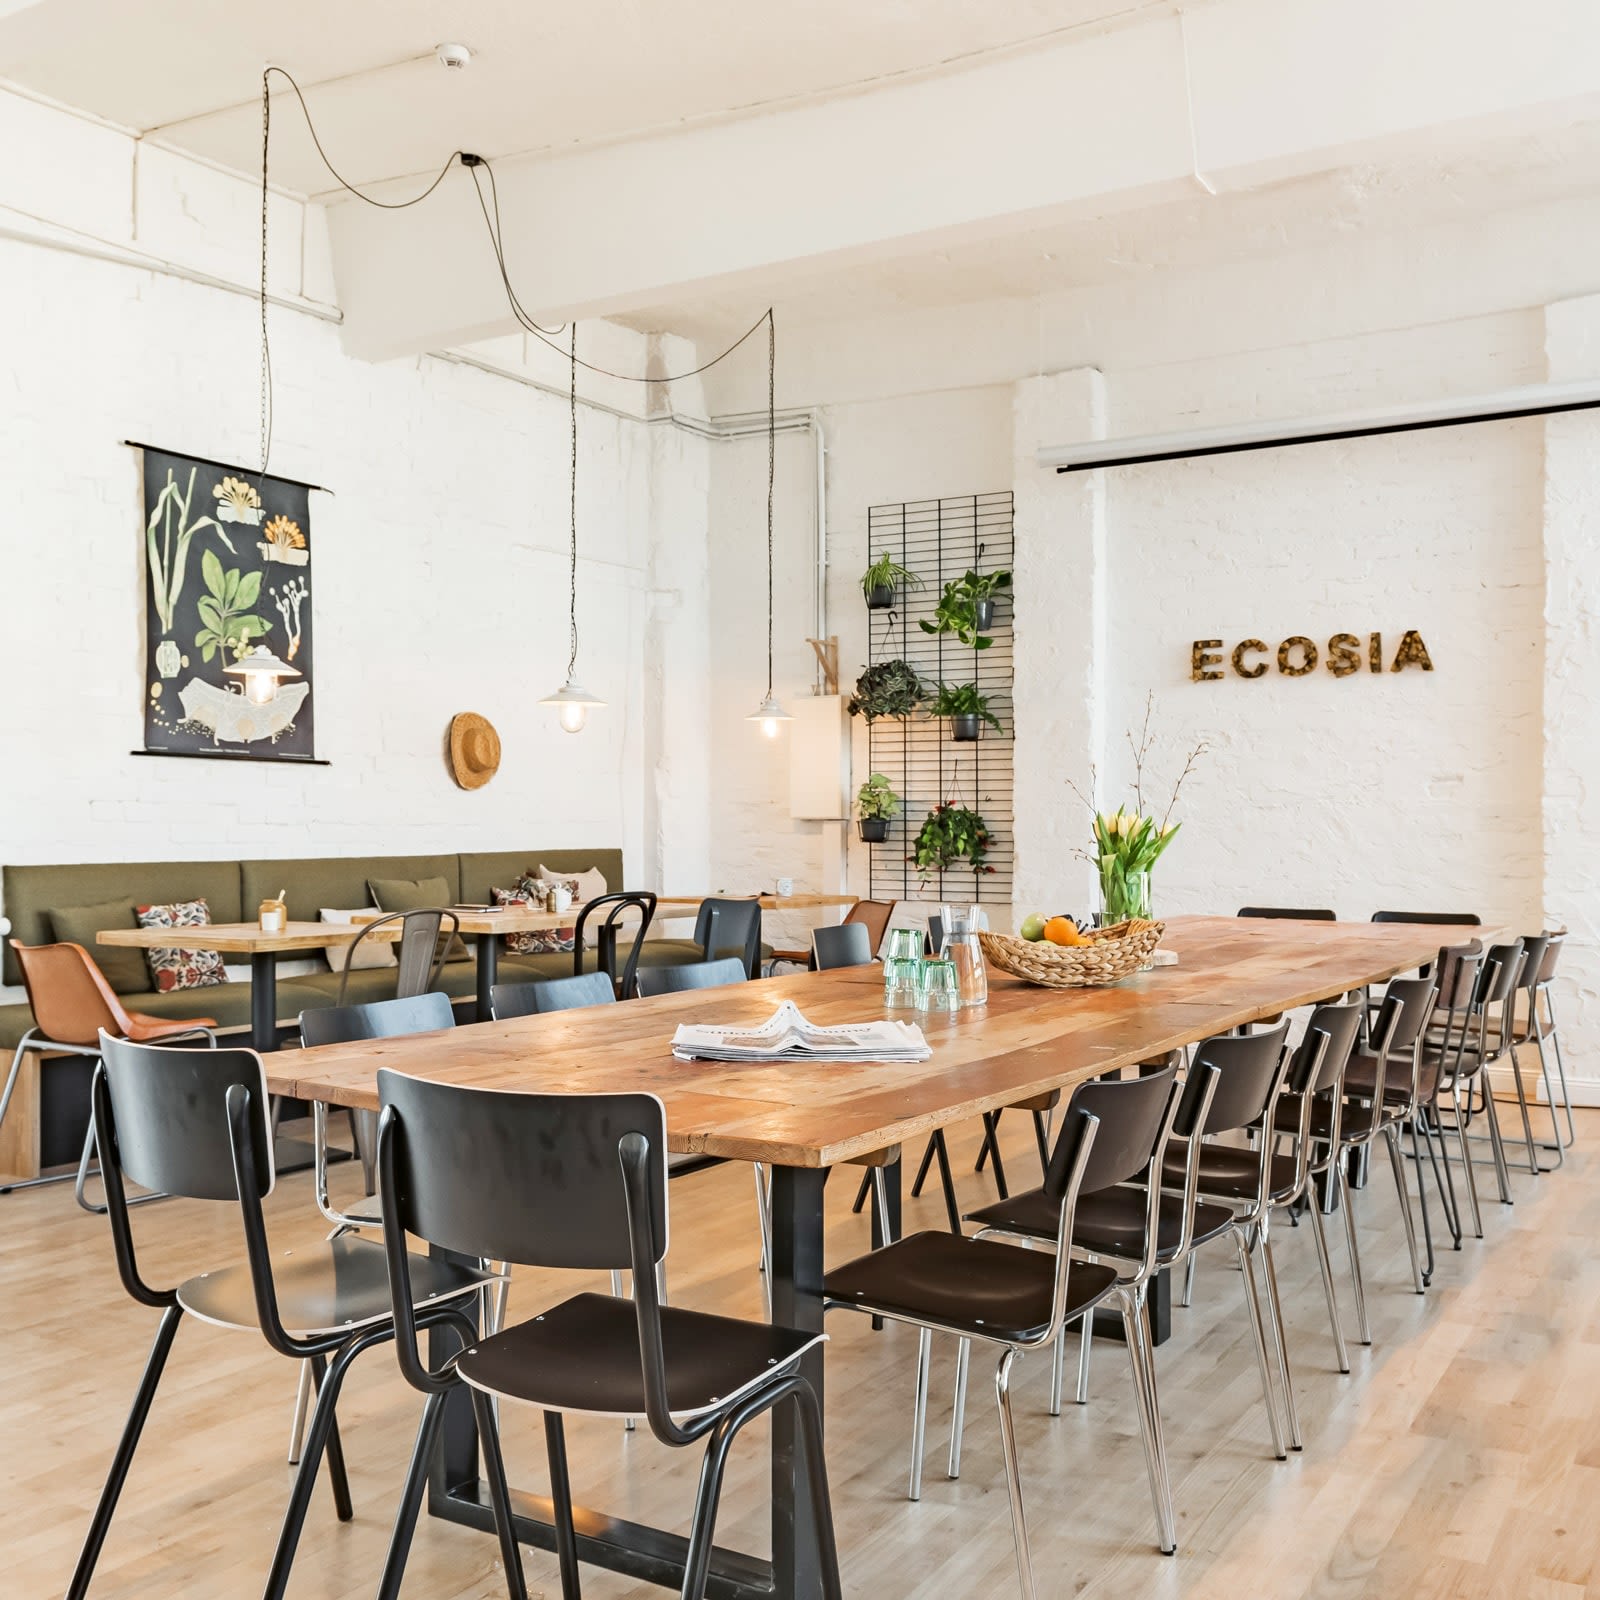 Inside the Ecosia office